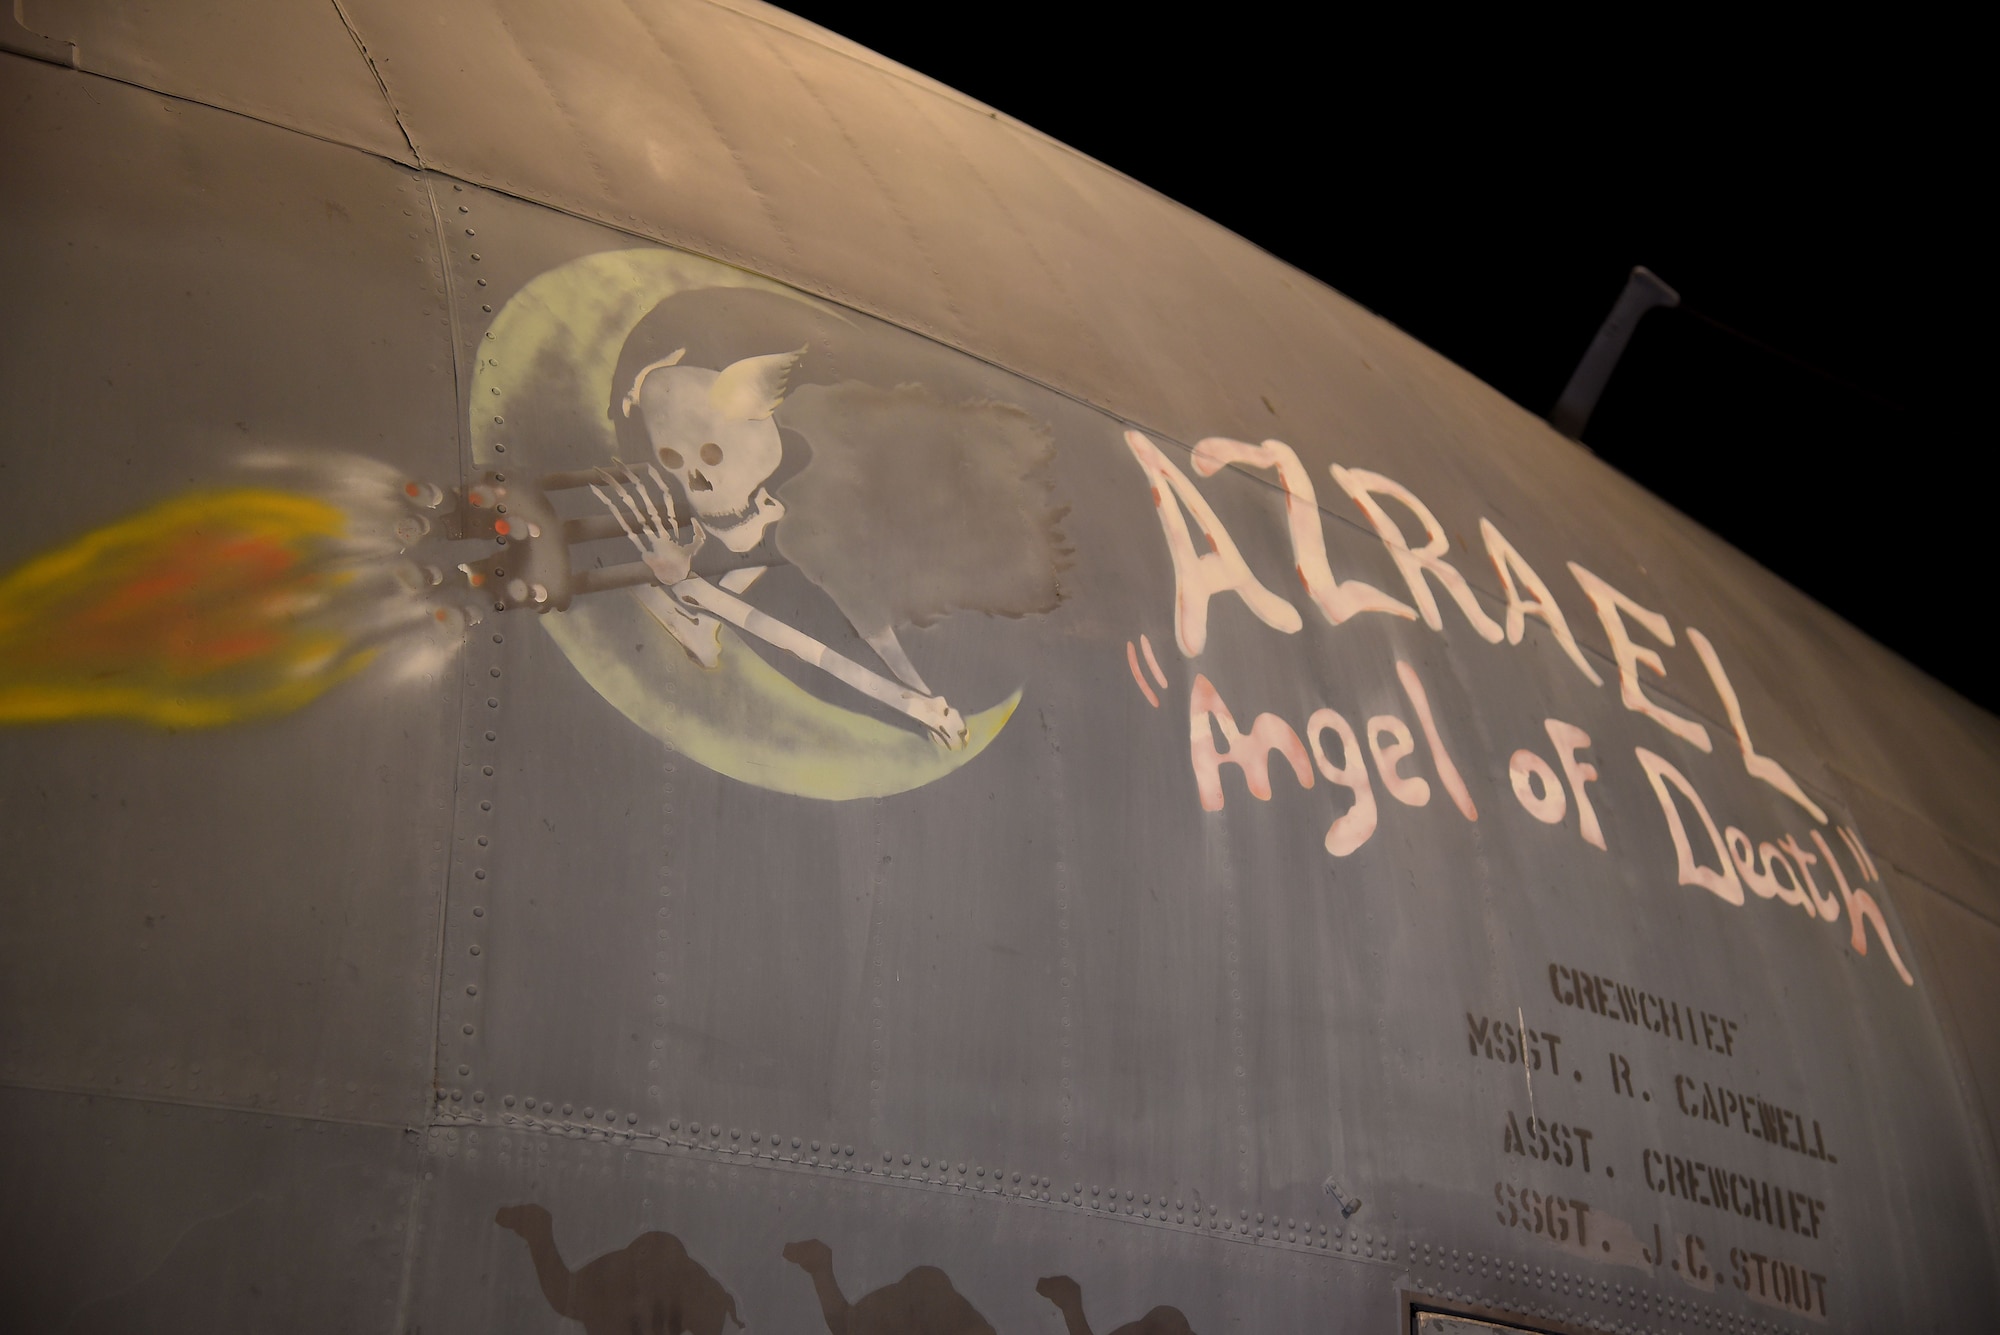 DAYTON, Ohio -- Lockheed AC-130A "Azrael" in the Cold War Gallery at the National Museum of the United States Air Force. (U.S. Air Force photo)